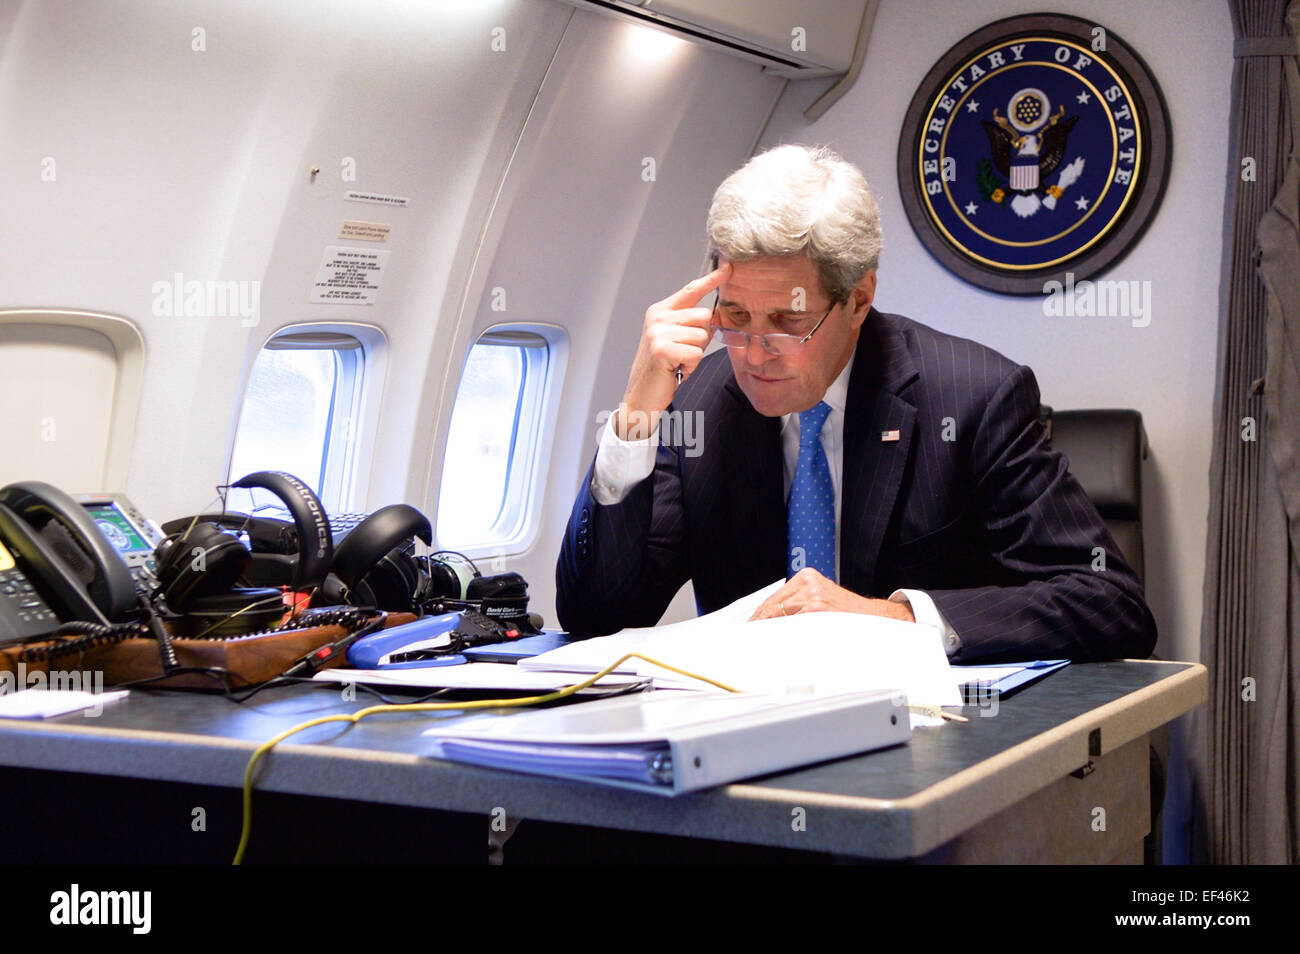 U.S. Secretary of State John Kerry sits in the cabin of his Air Force jet, working on the speech he was to deliver at the World Economic Forum in Davos, Switzerland, after arriving in Zurich, Switzerland, on January 23, 2015. Stock Photo